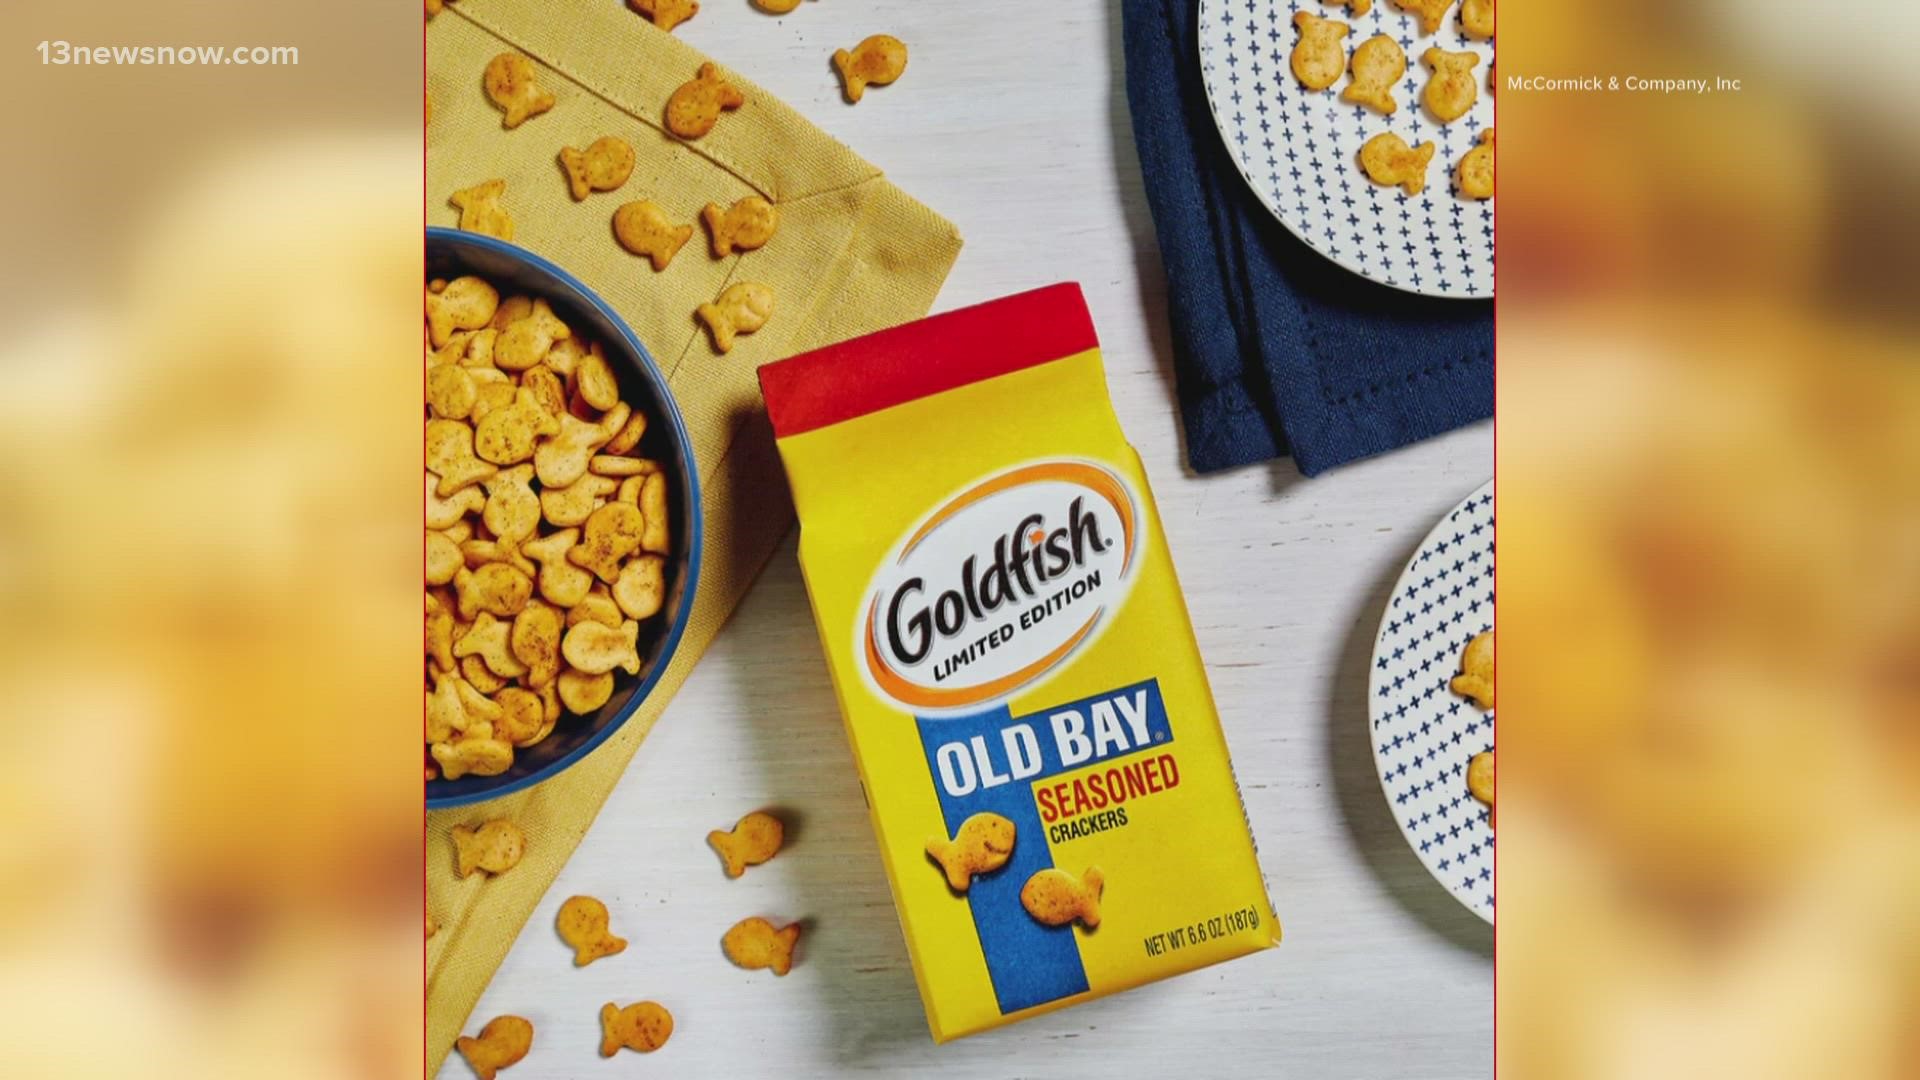 For a limited time, Goldfish and McCormick & Company are joining forces for the ultimate East Coast snack: OLD BAY Goldfish.